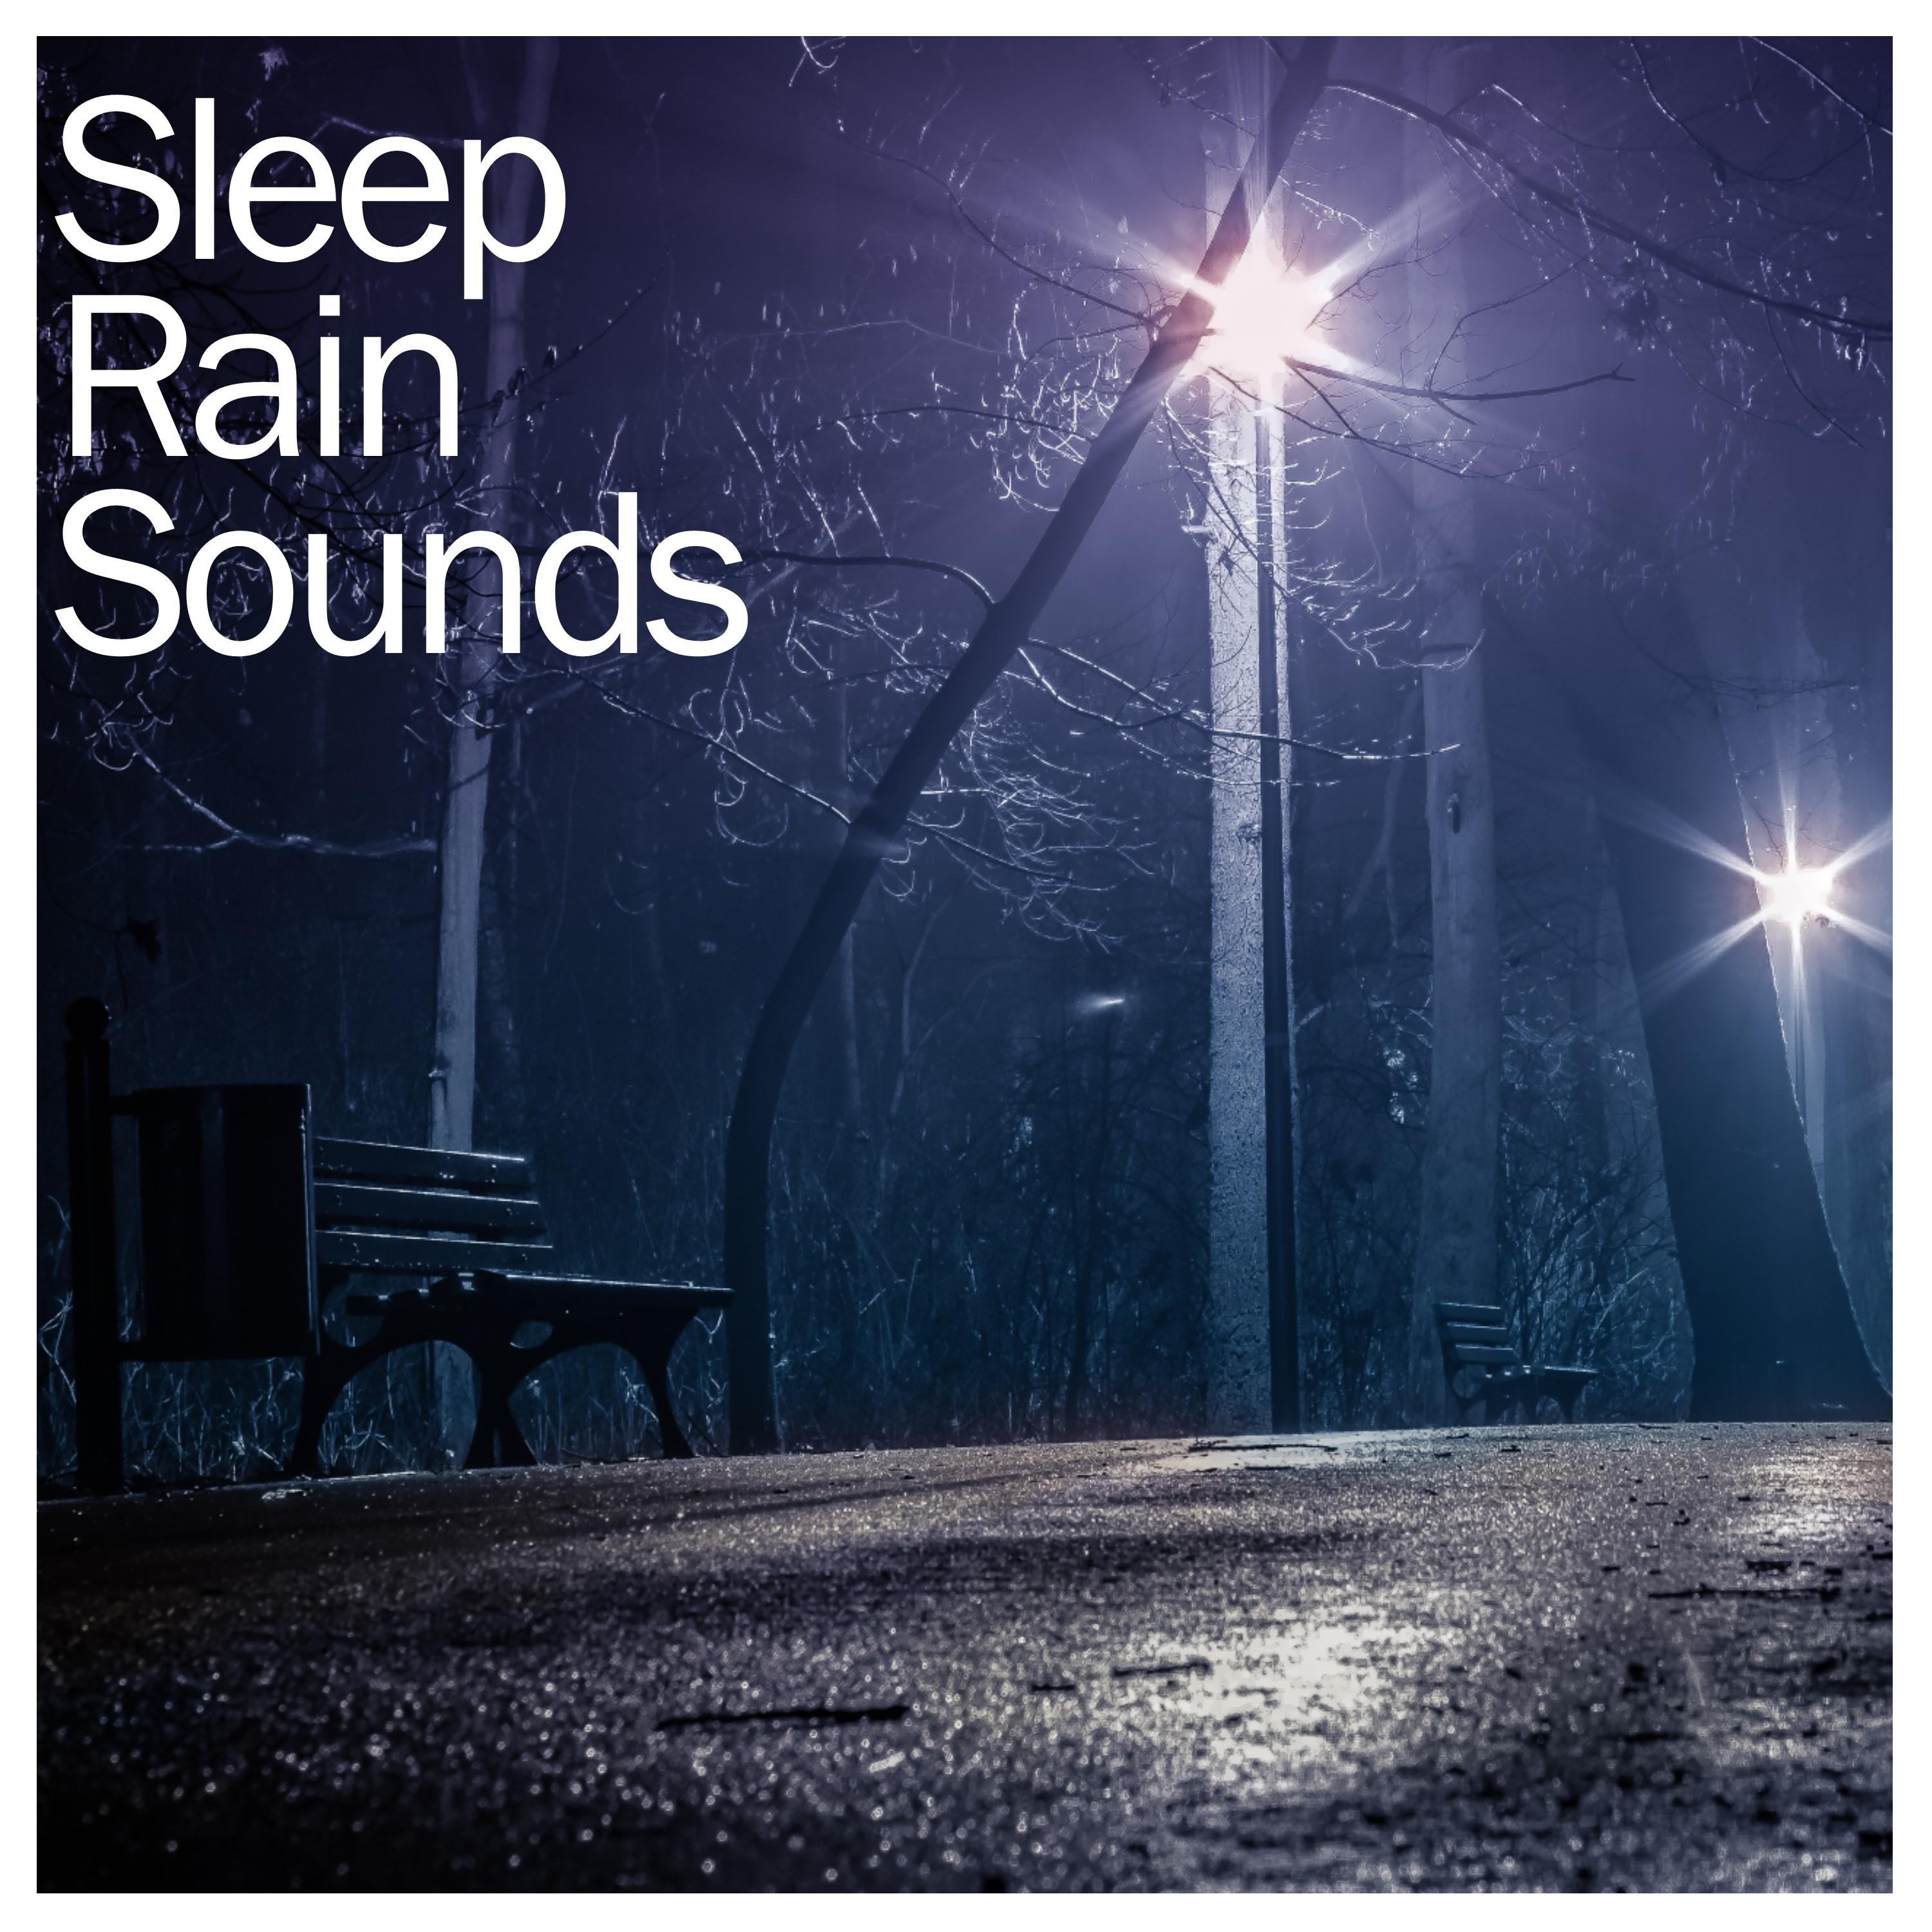 20 Sleep Sounds of Nature and Spa Relaxation Rain Sounds